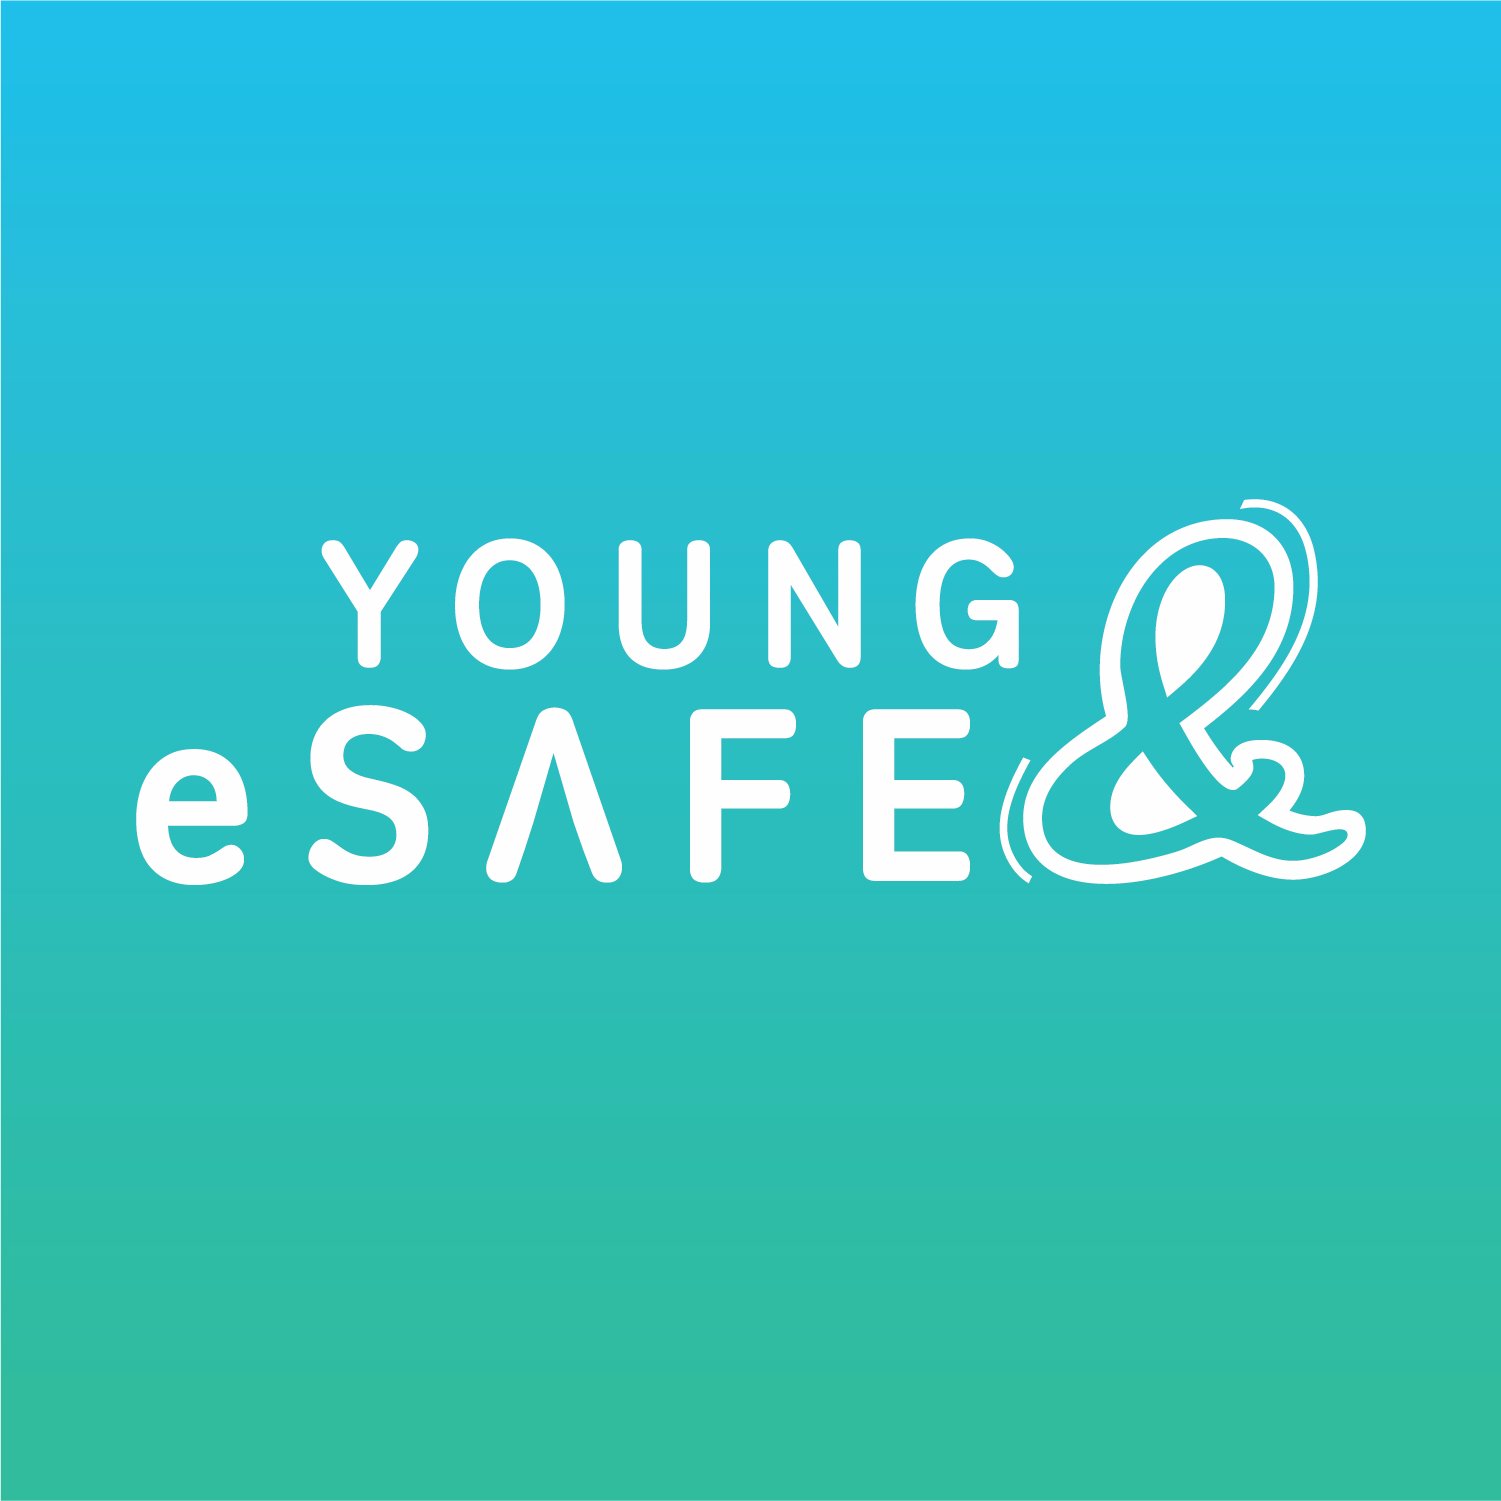 Young & eSafe